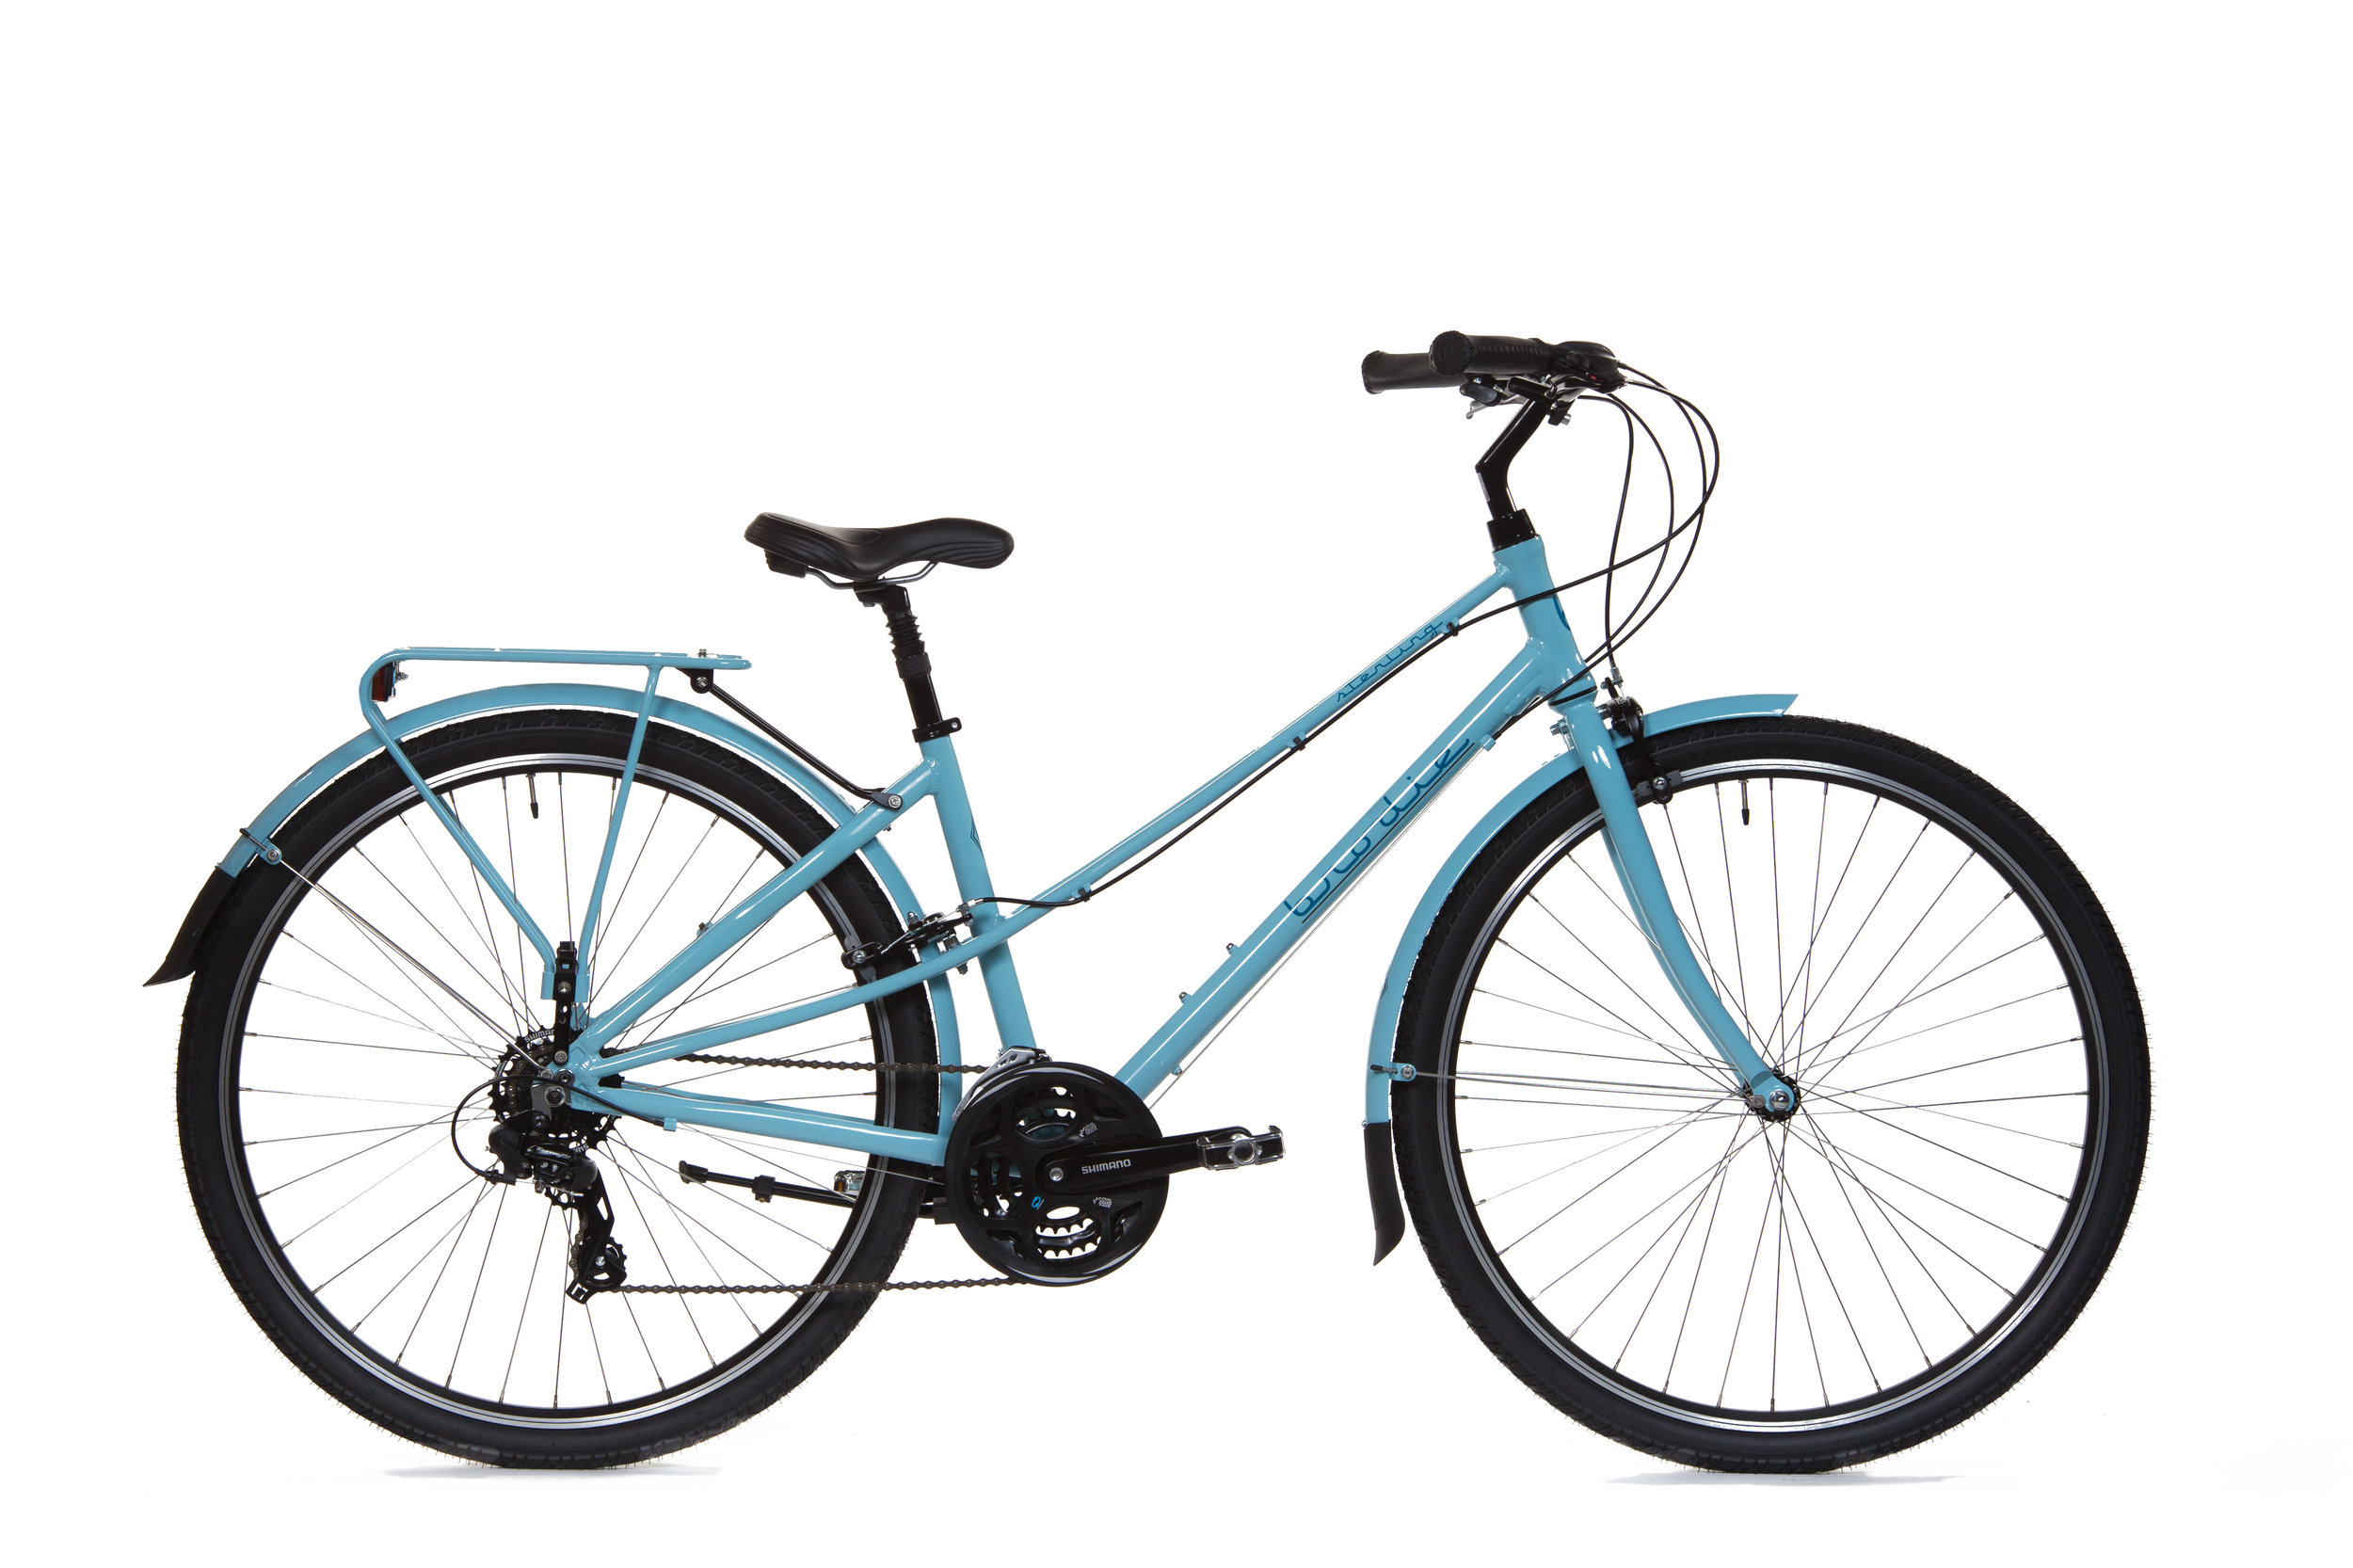 Sterling Mixte - $699